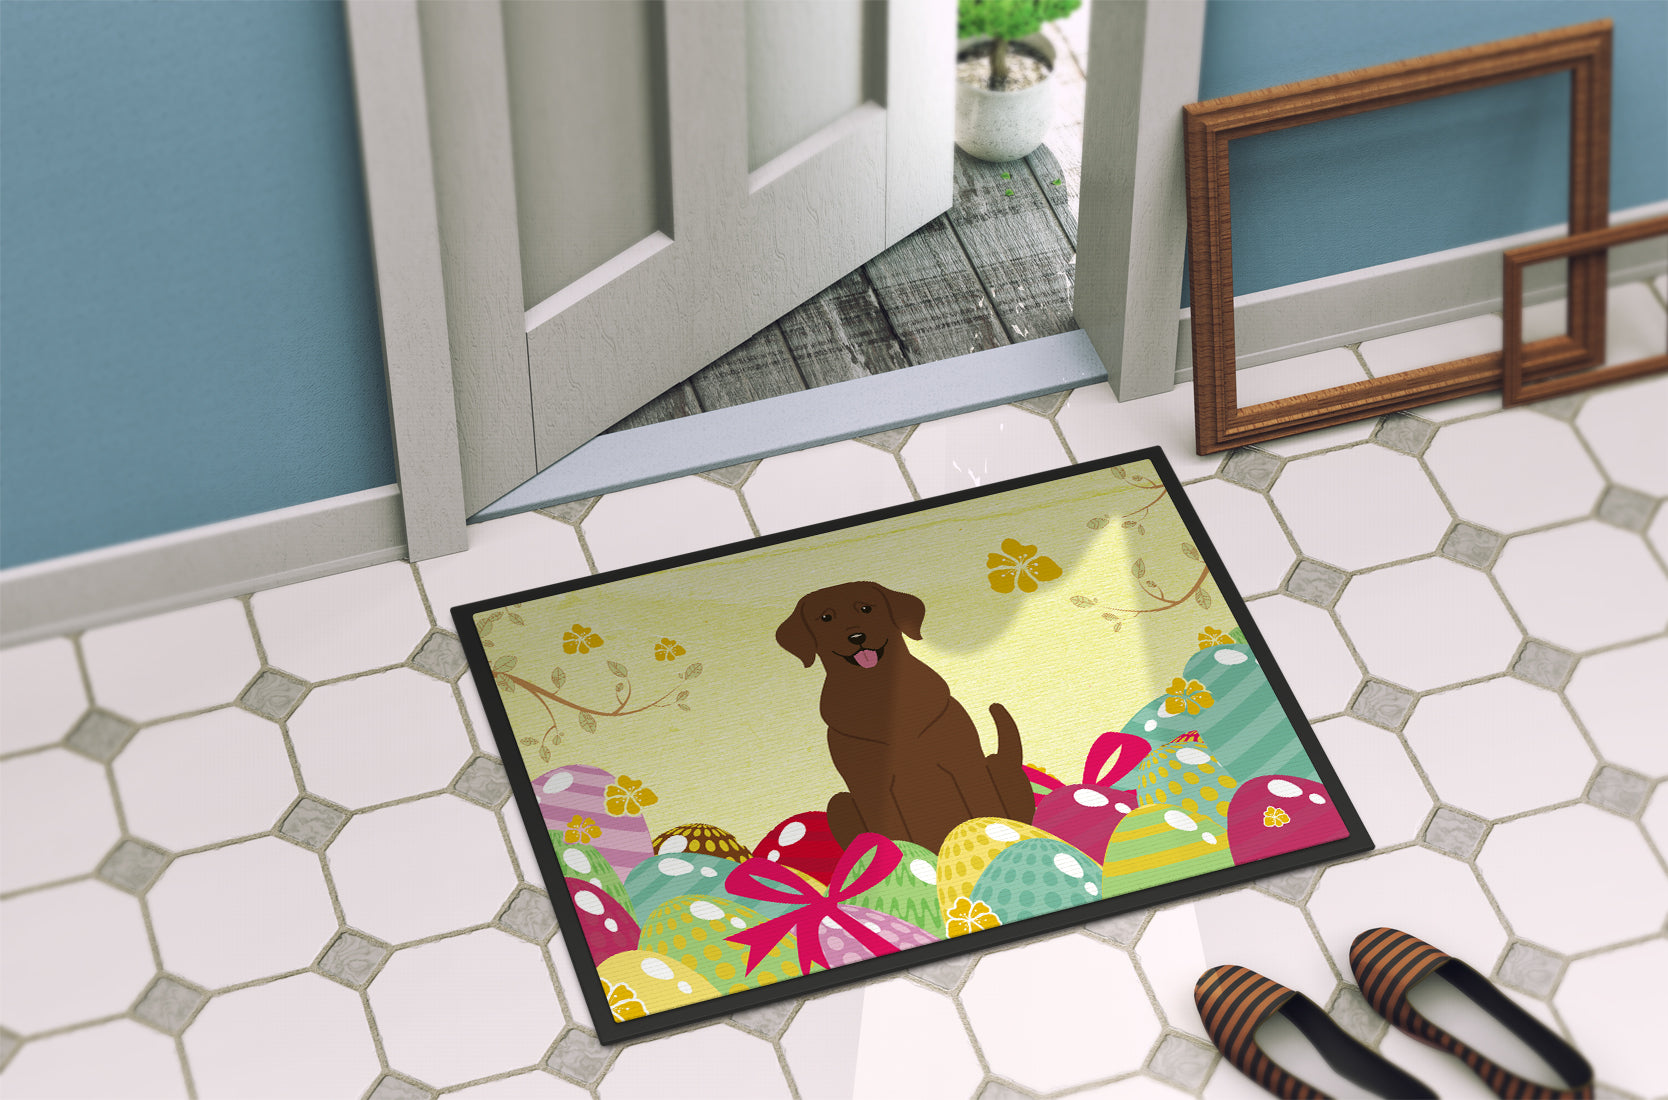 Easter Eggs Chocolate Labrador Indoor or Outdoor Mat 18x27 BB6056MAT - the-store.com